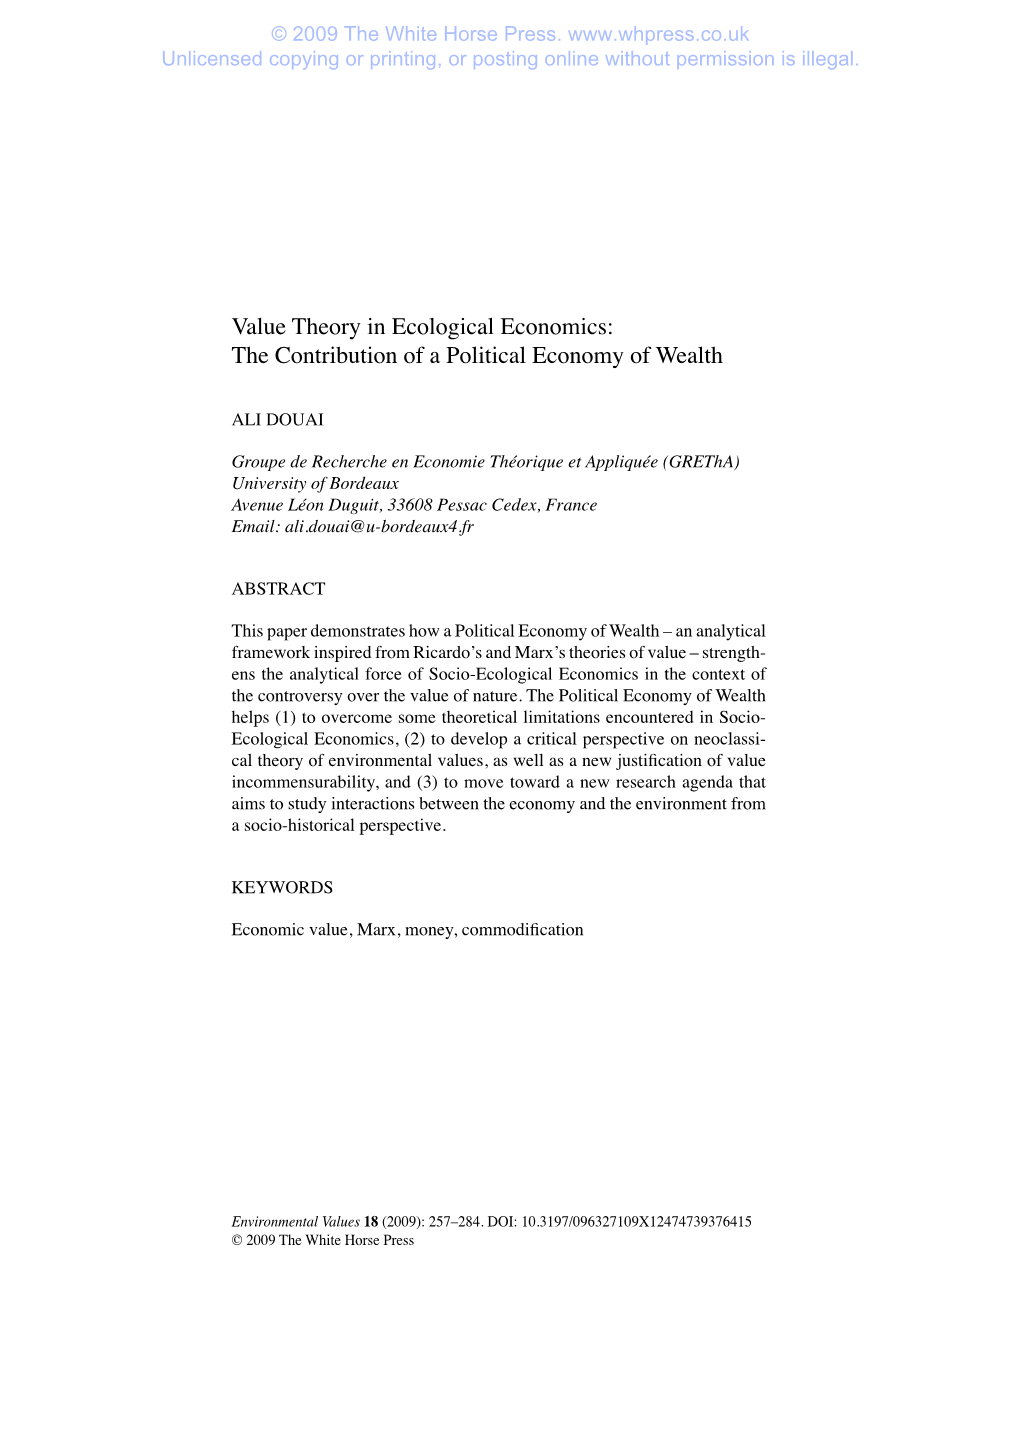 Value Theory in Ecological Economics: the Contribution of a Political Economy of Wealth